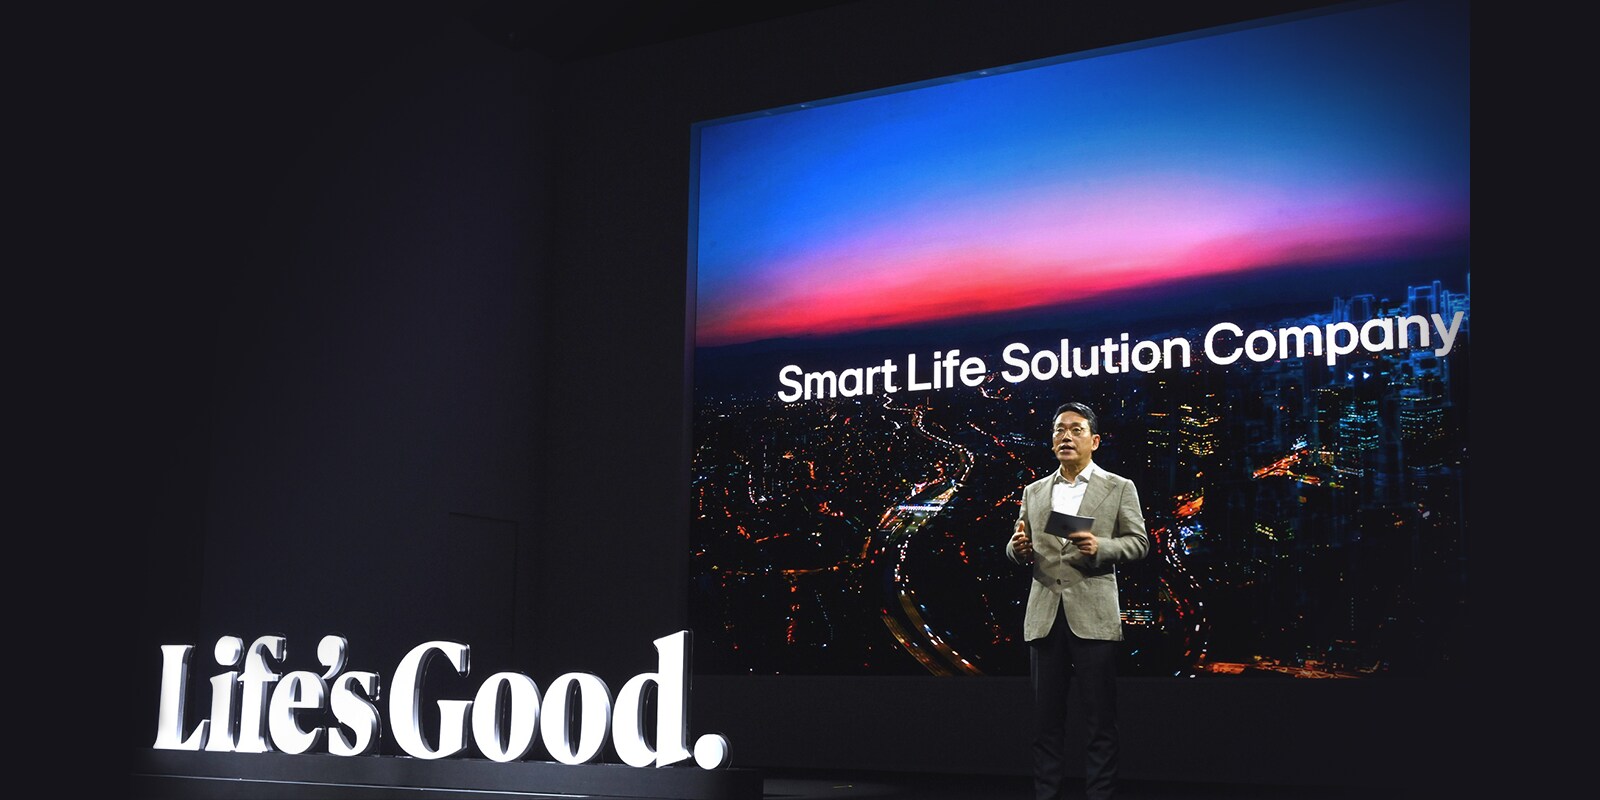 LG VS Company's CEO William Cho presenting LG's grand vision to go beyond consumer electronics into the realm of smart life solutions